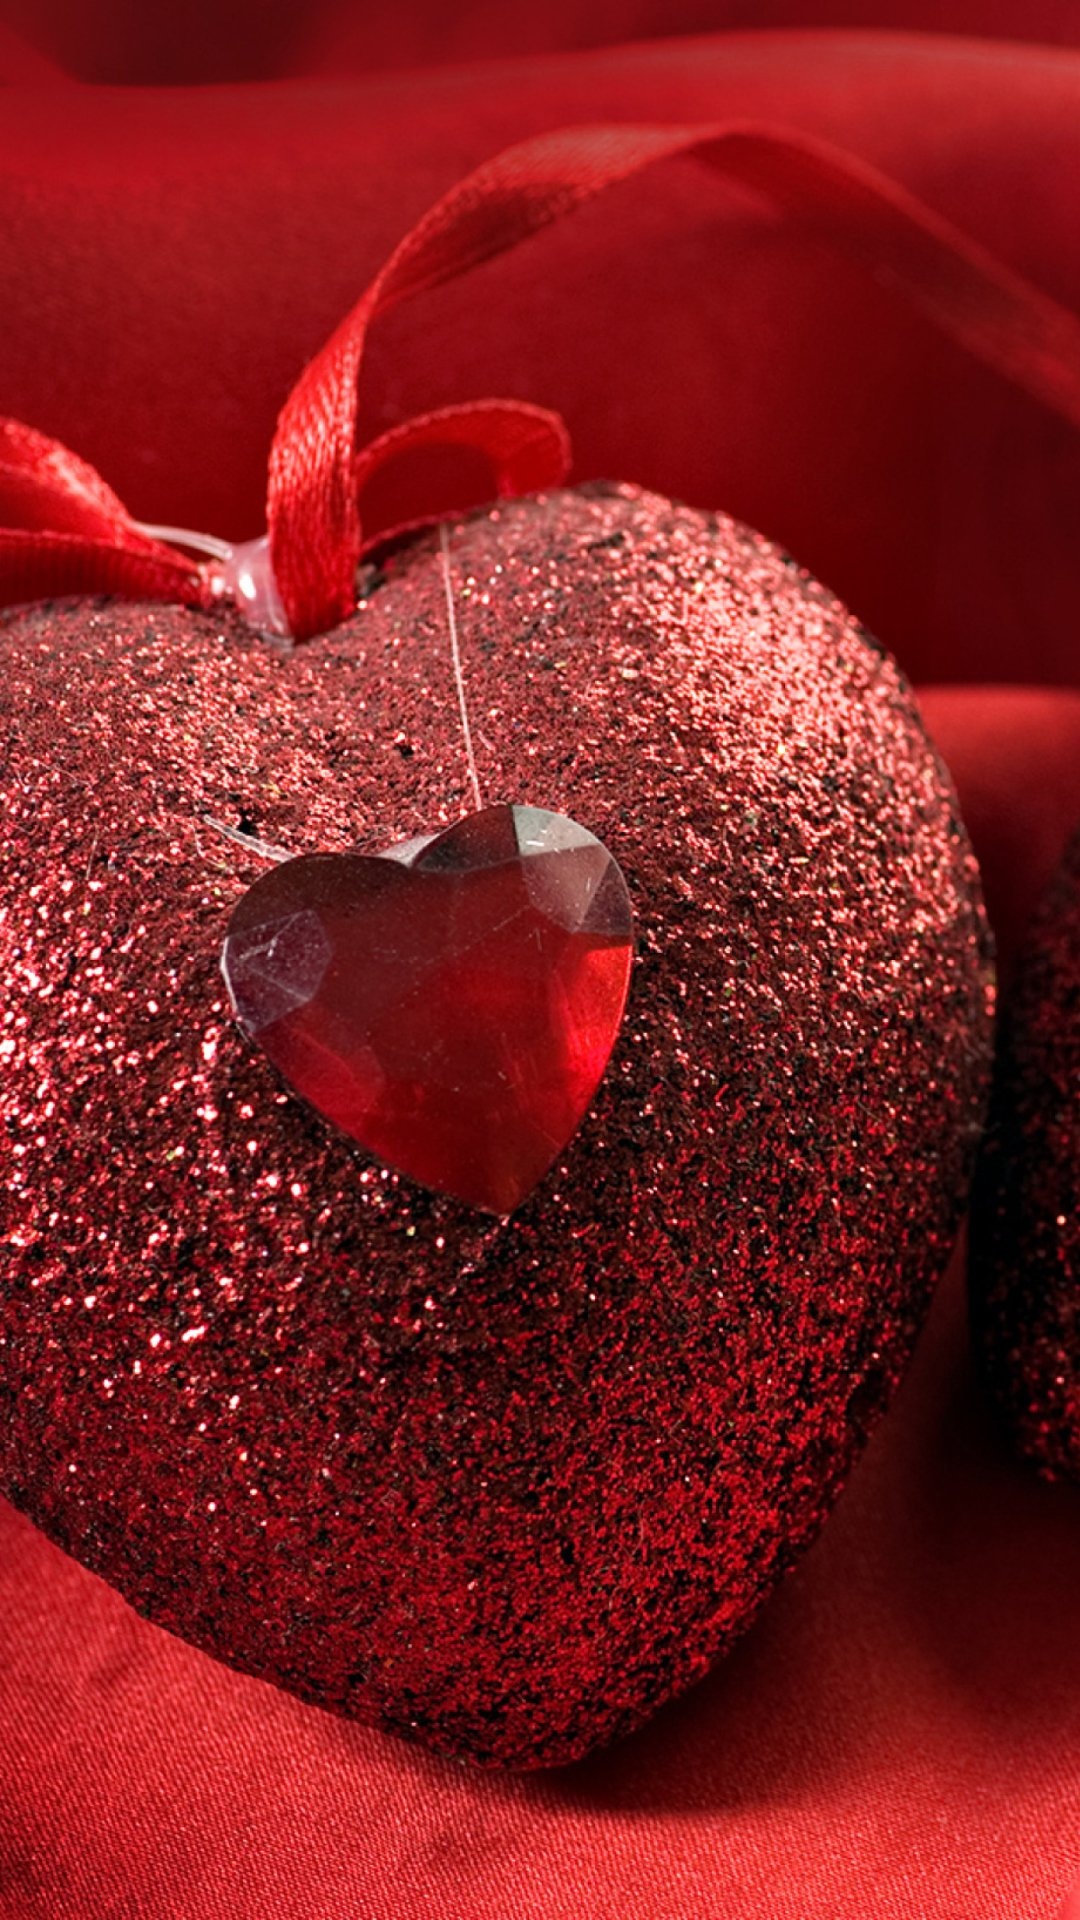 Red Love Heart Wallpapers